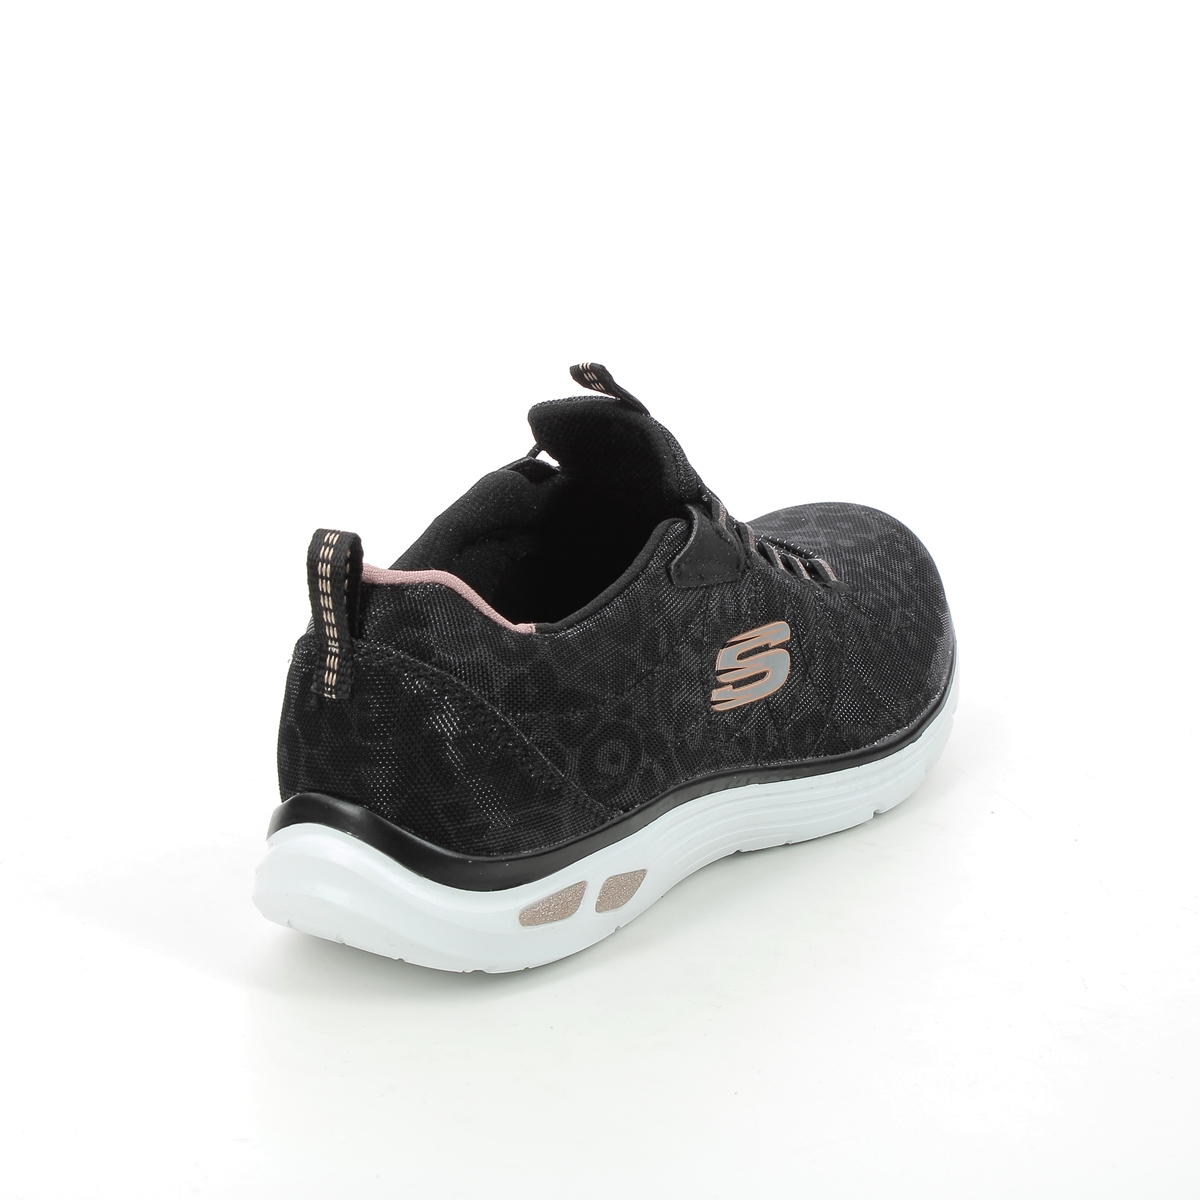 Relaxed 12825 BKRG Black Rose Gold trainers